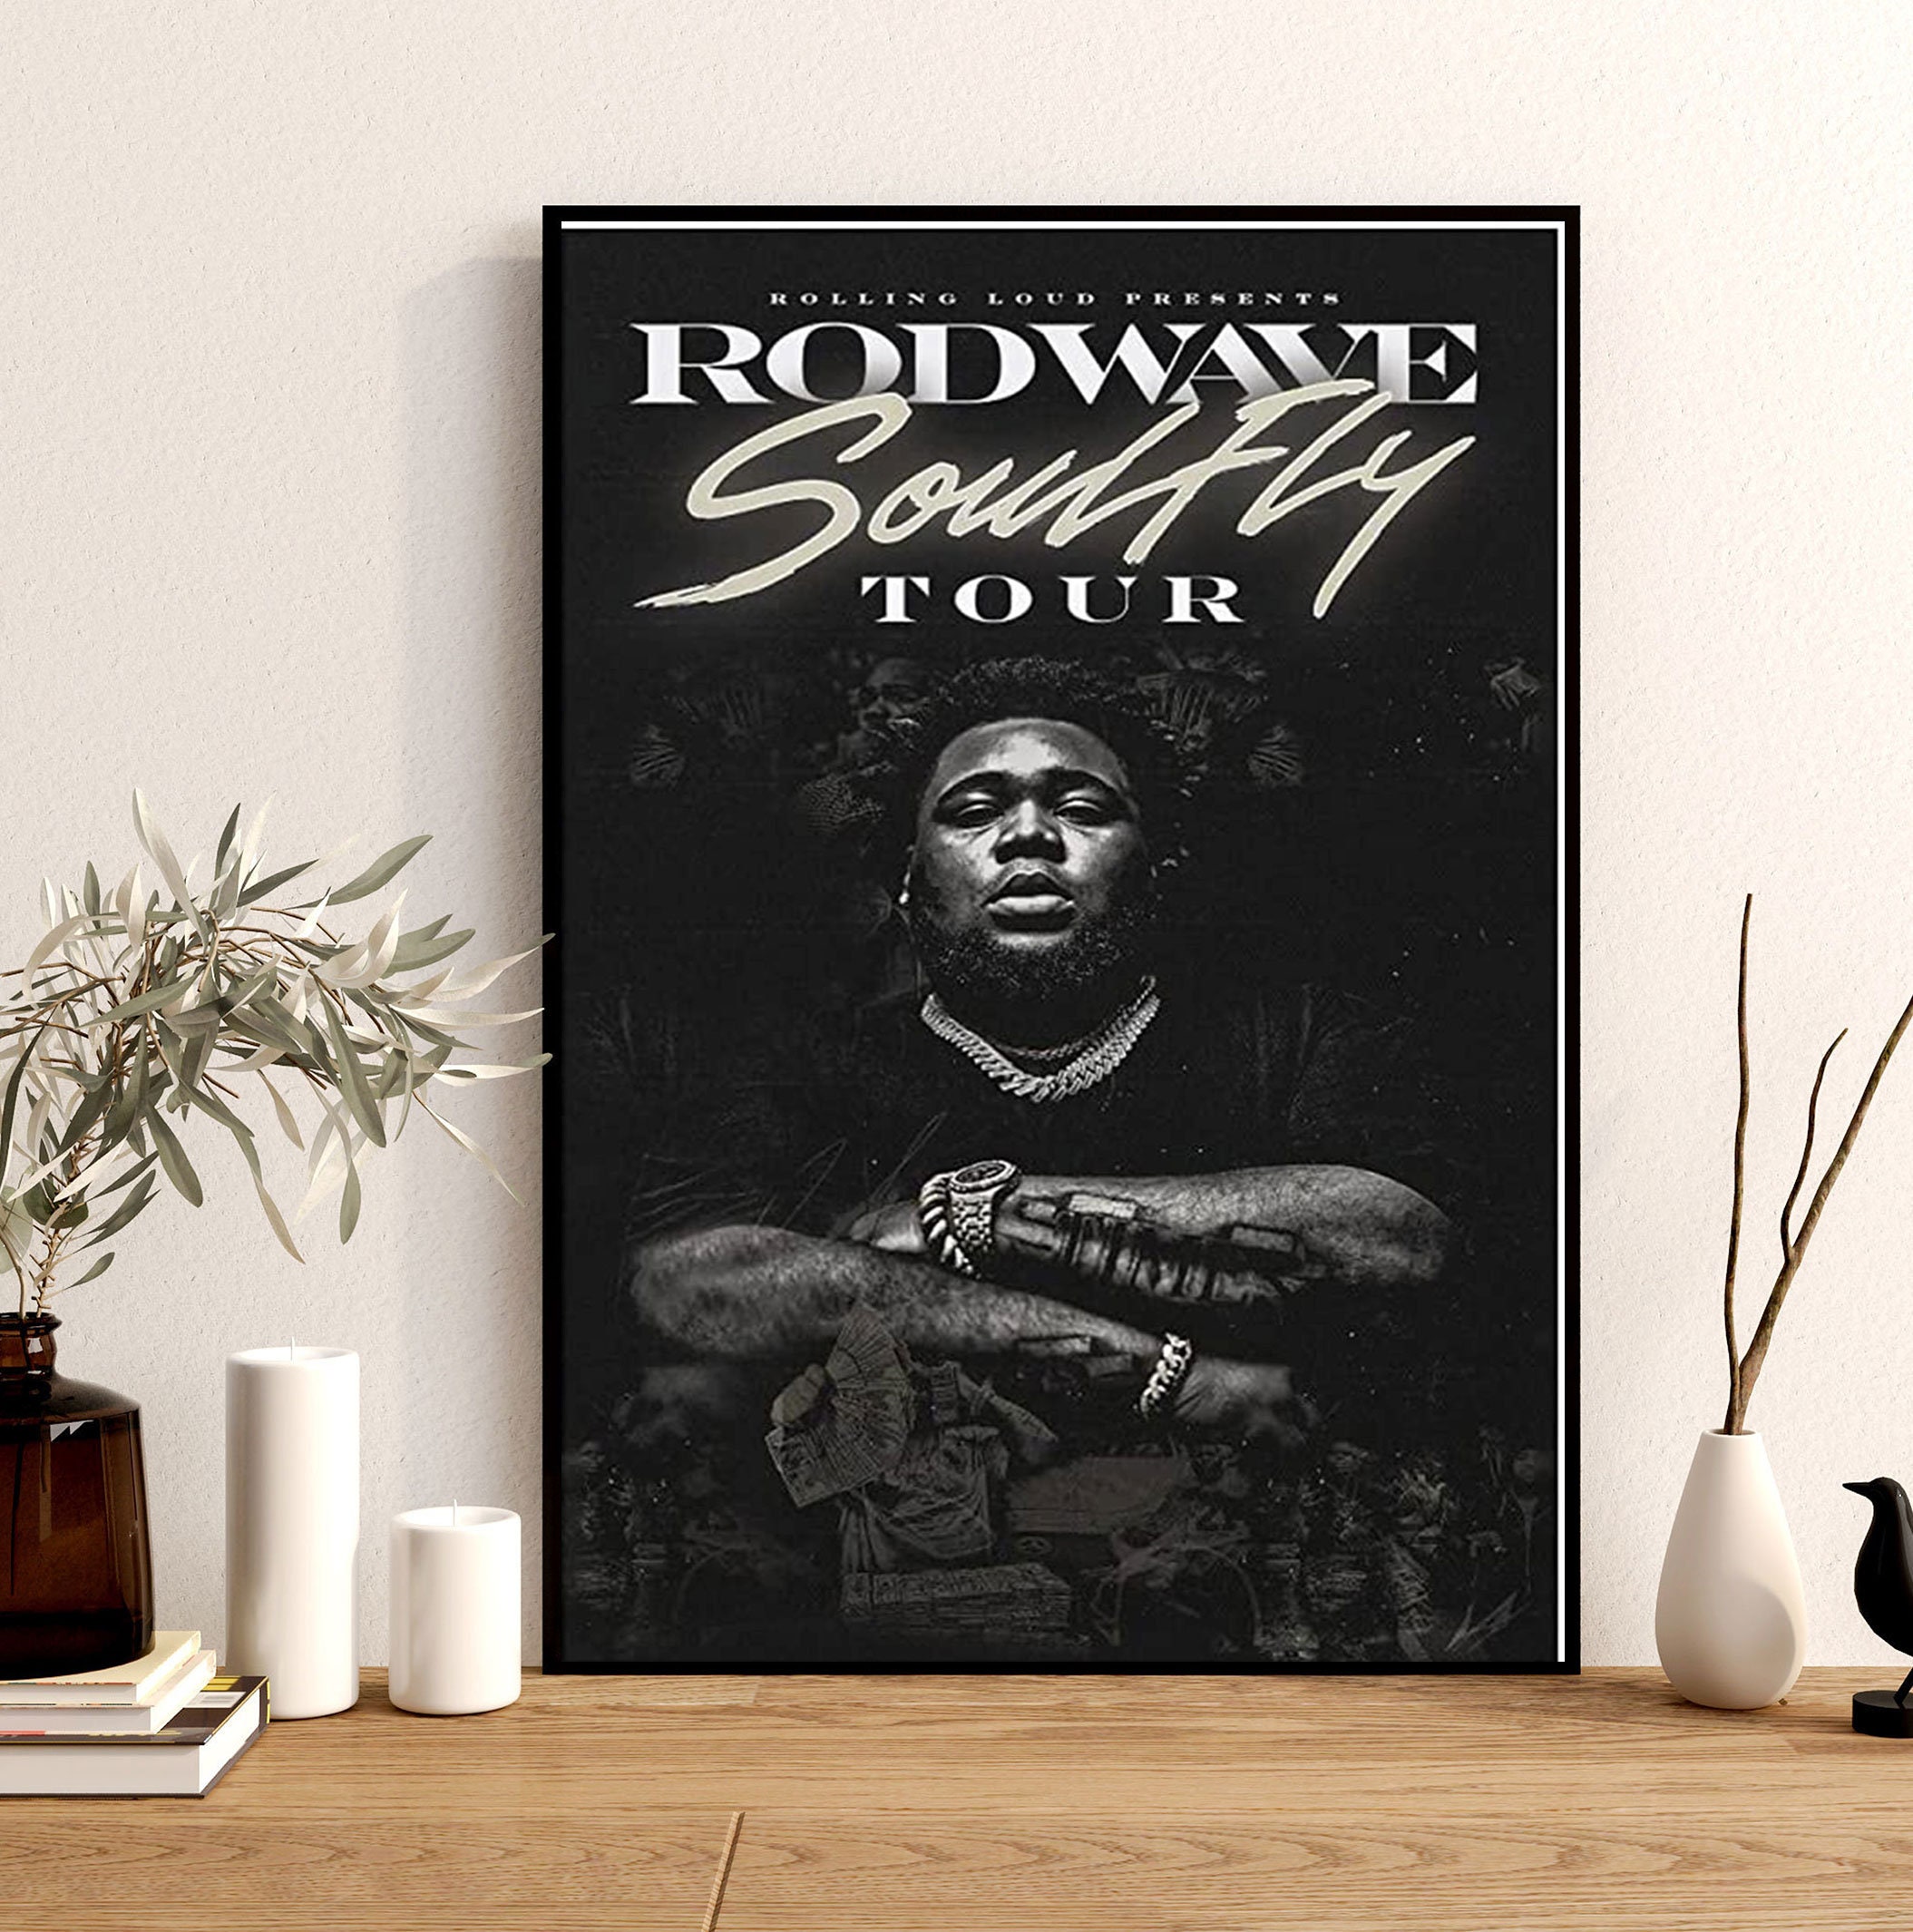 Discover Singer Rod Wave Album Soulfly Poster, Art Music Album Poster